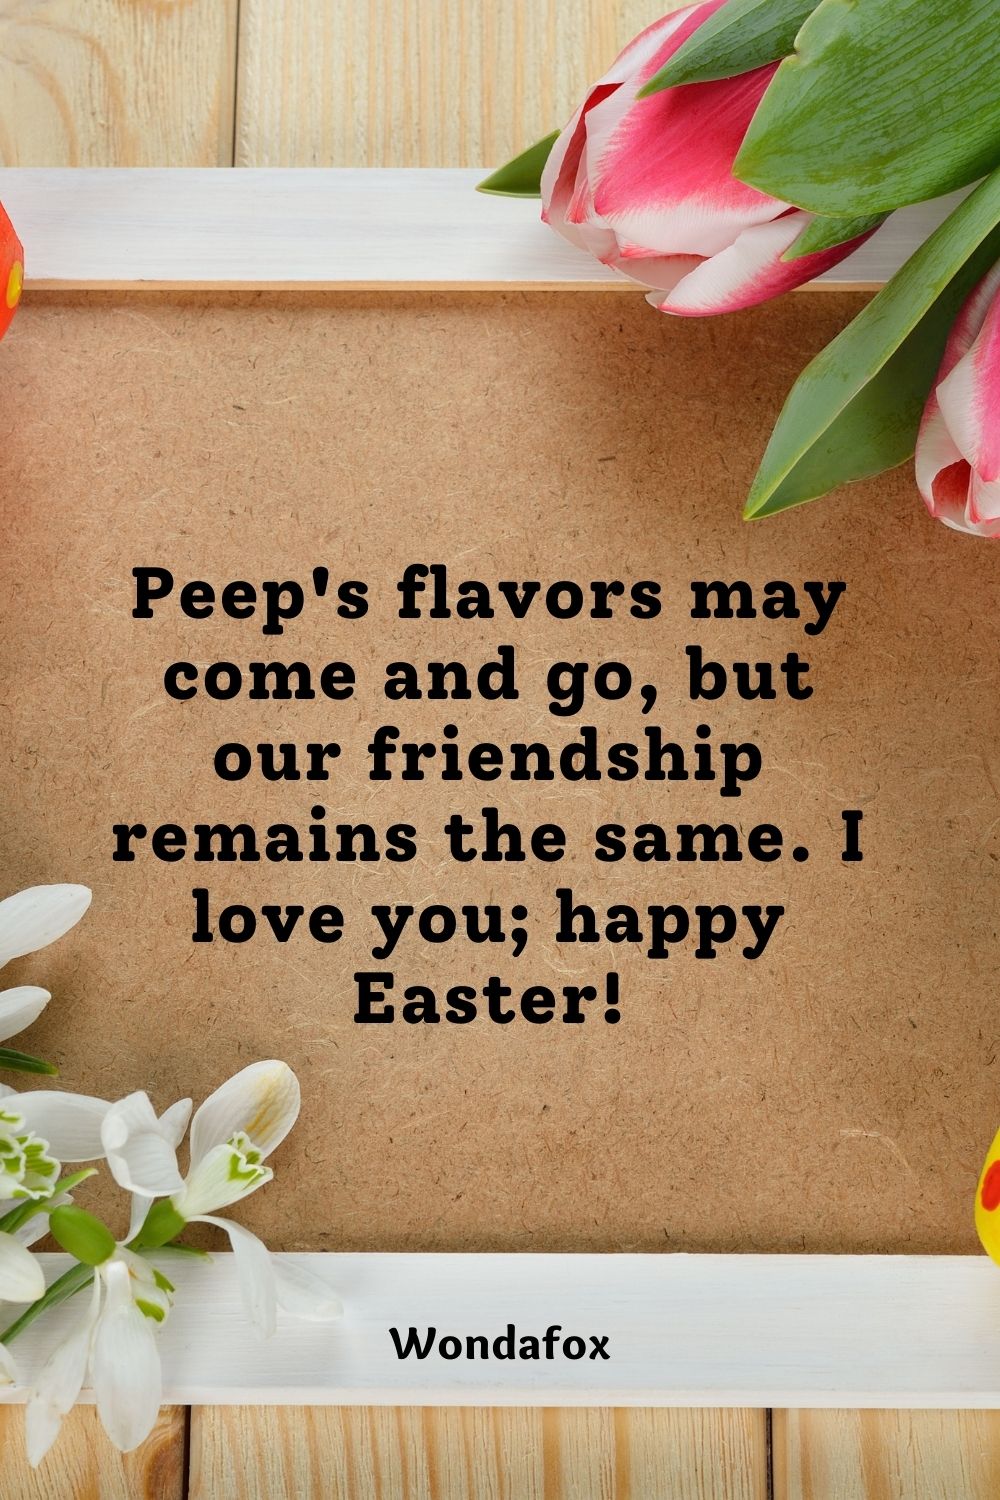 Peep's flavors may come and go, but our friendship remains the same. I love you; happy Easter!